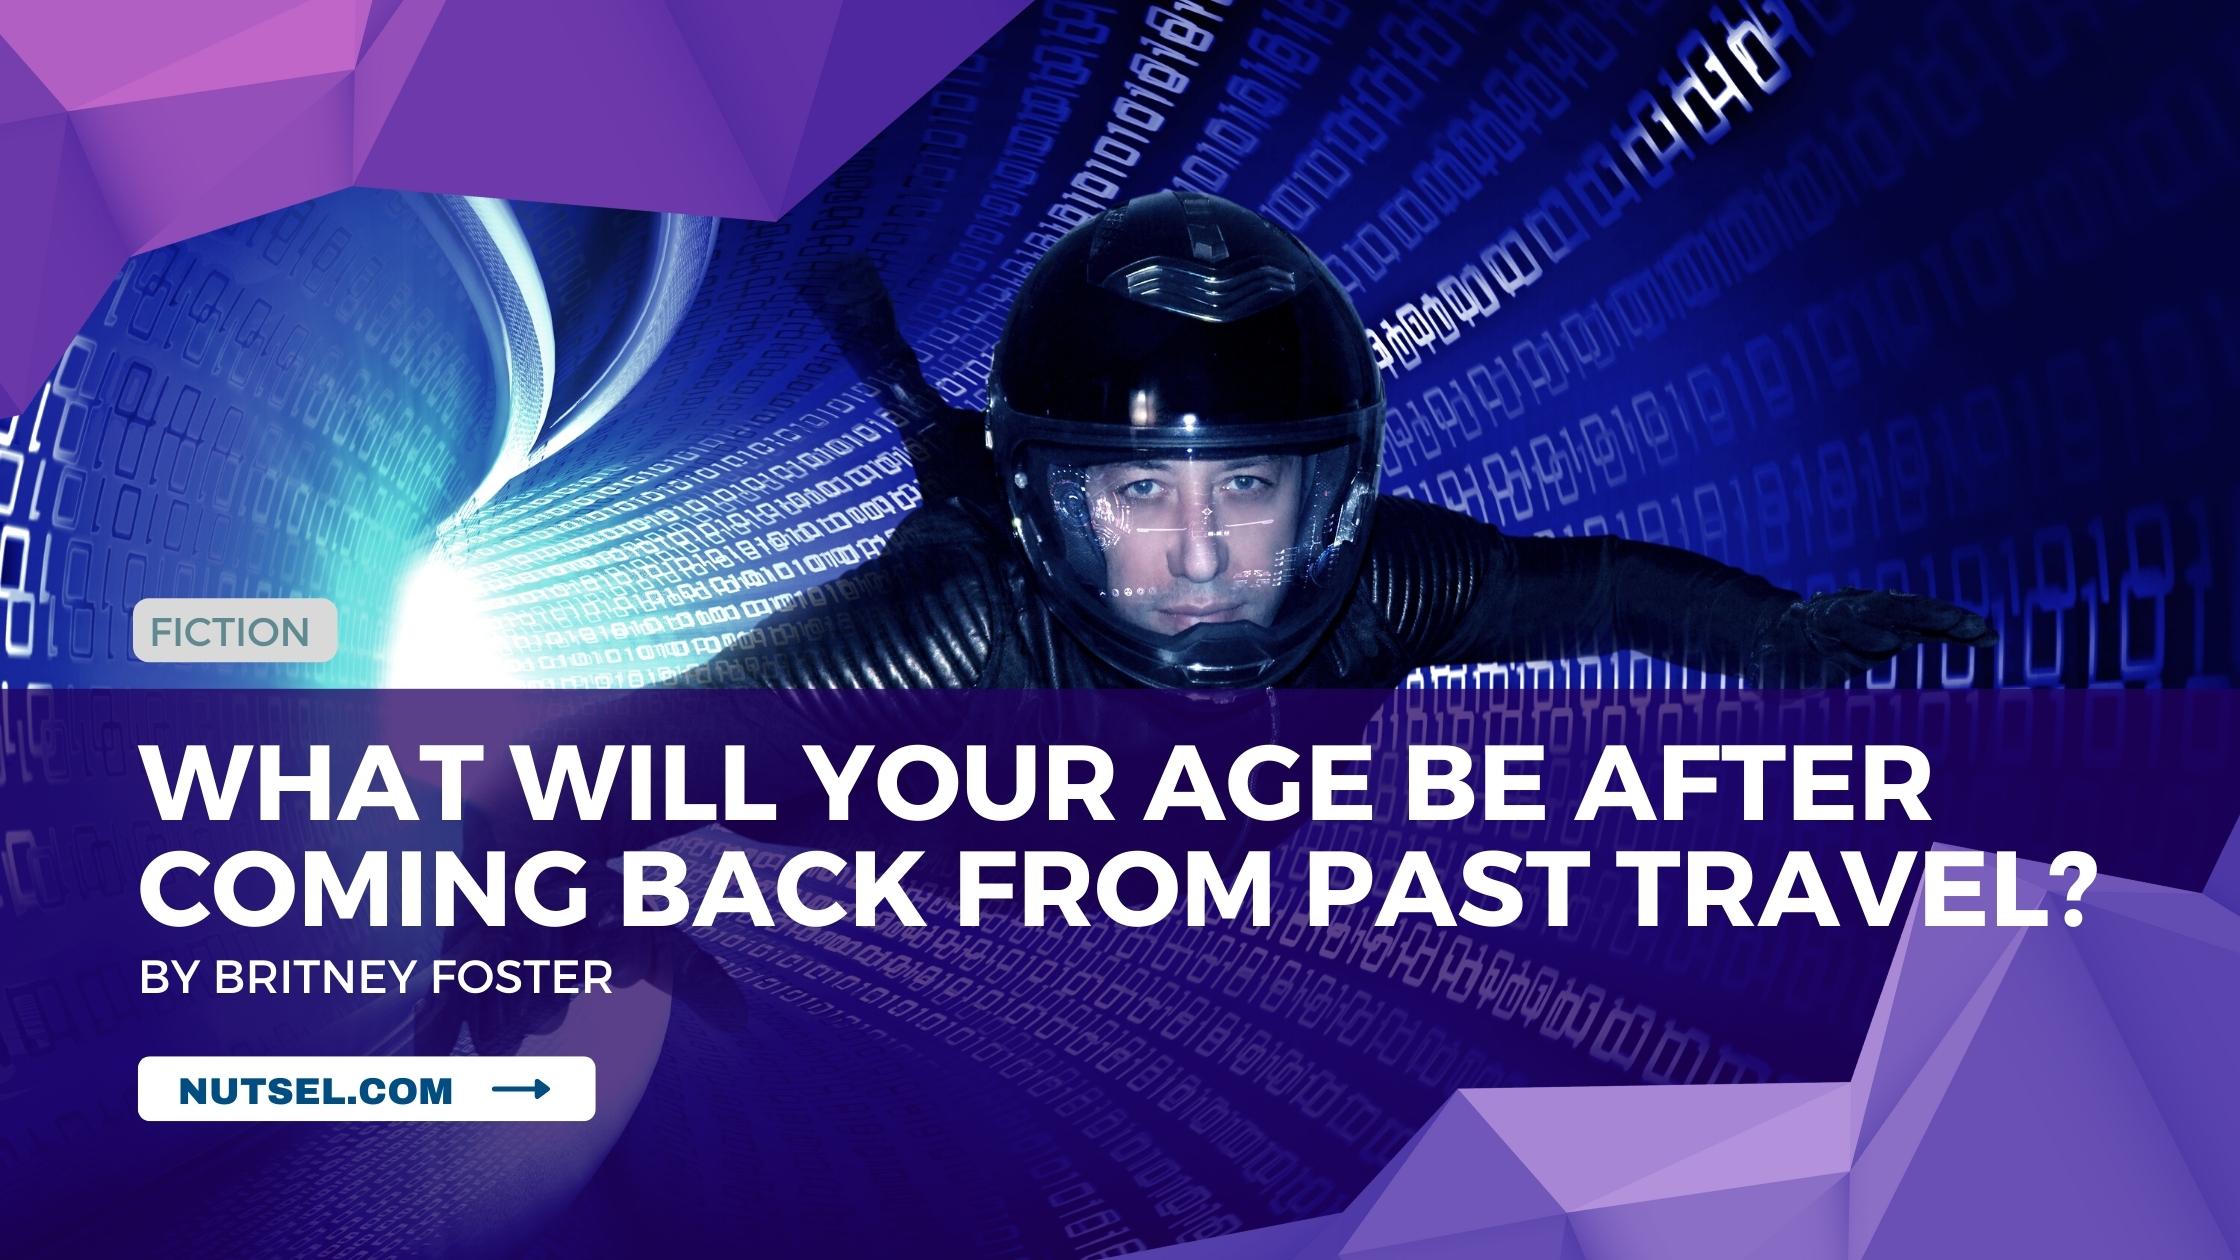 What will your age be after coming back from past travel?